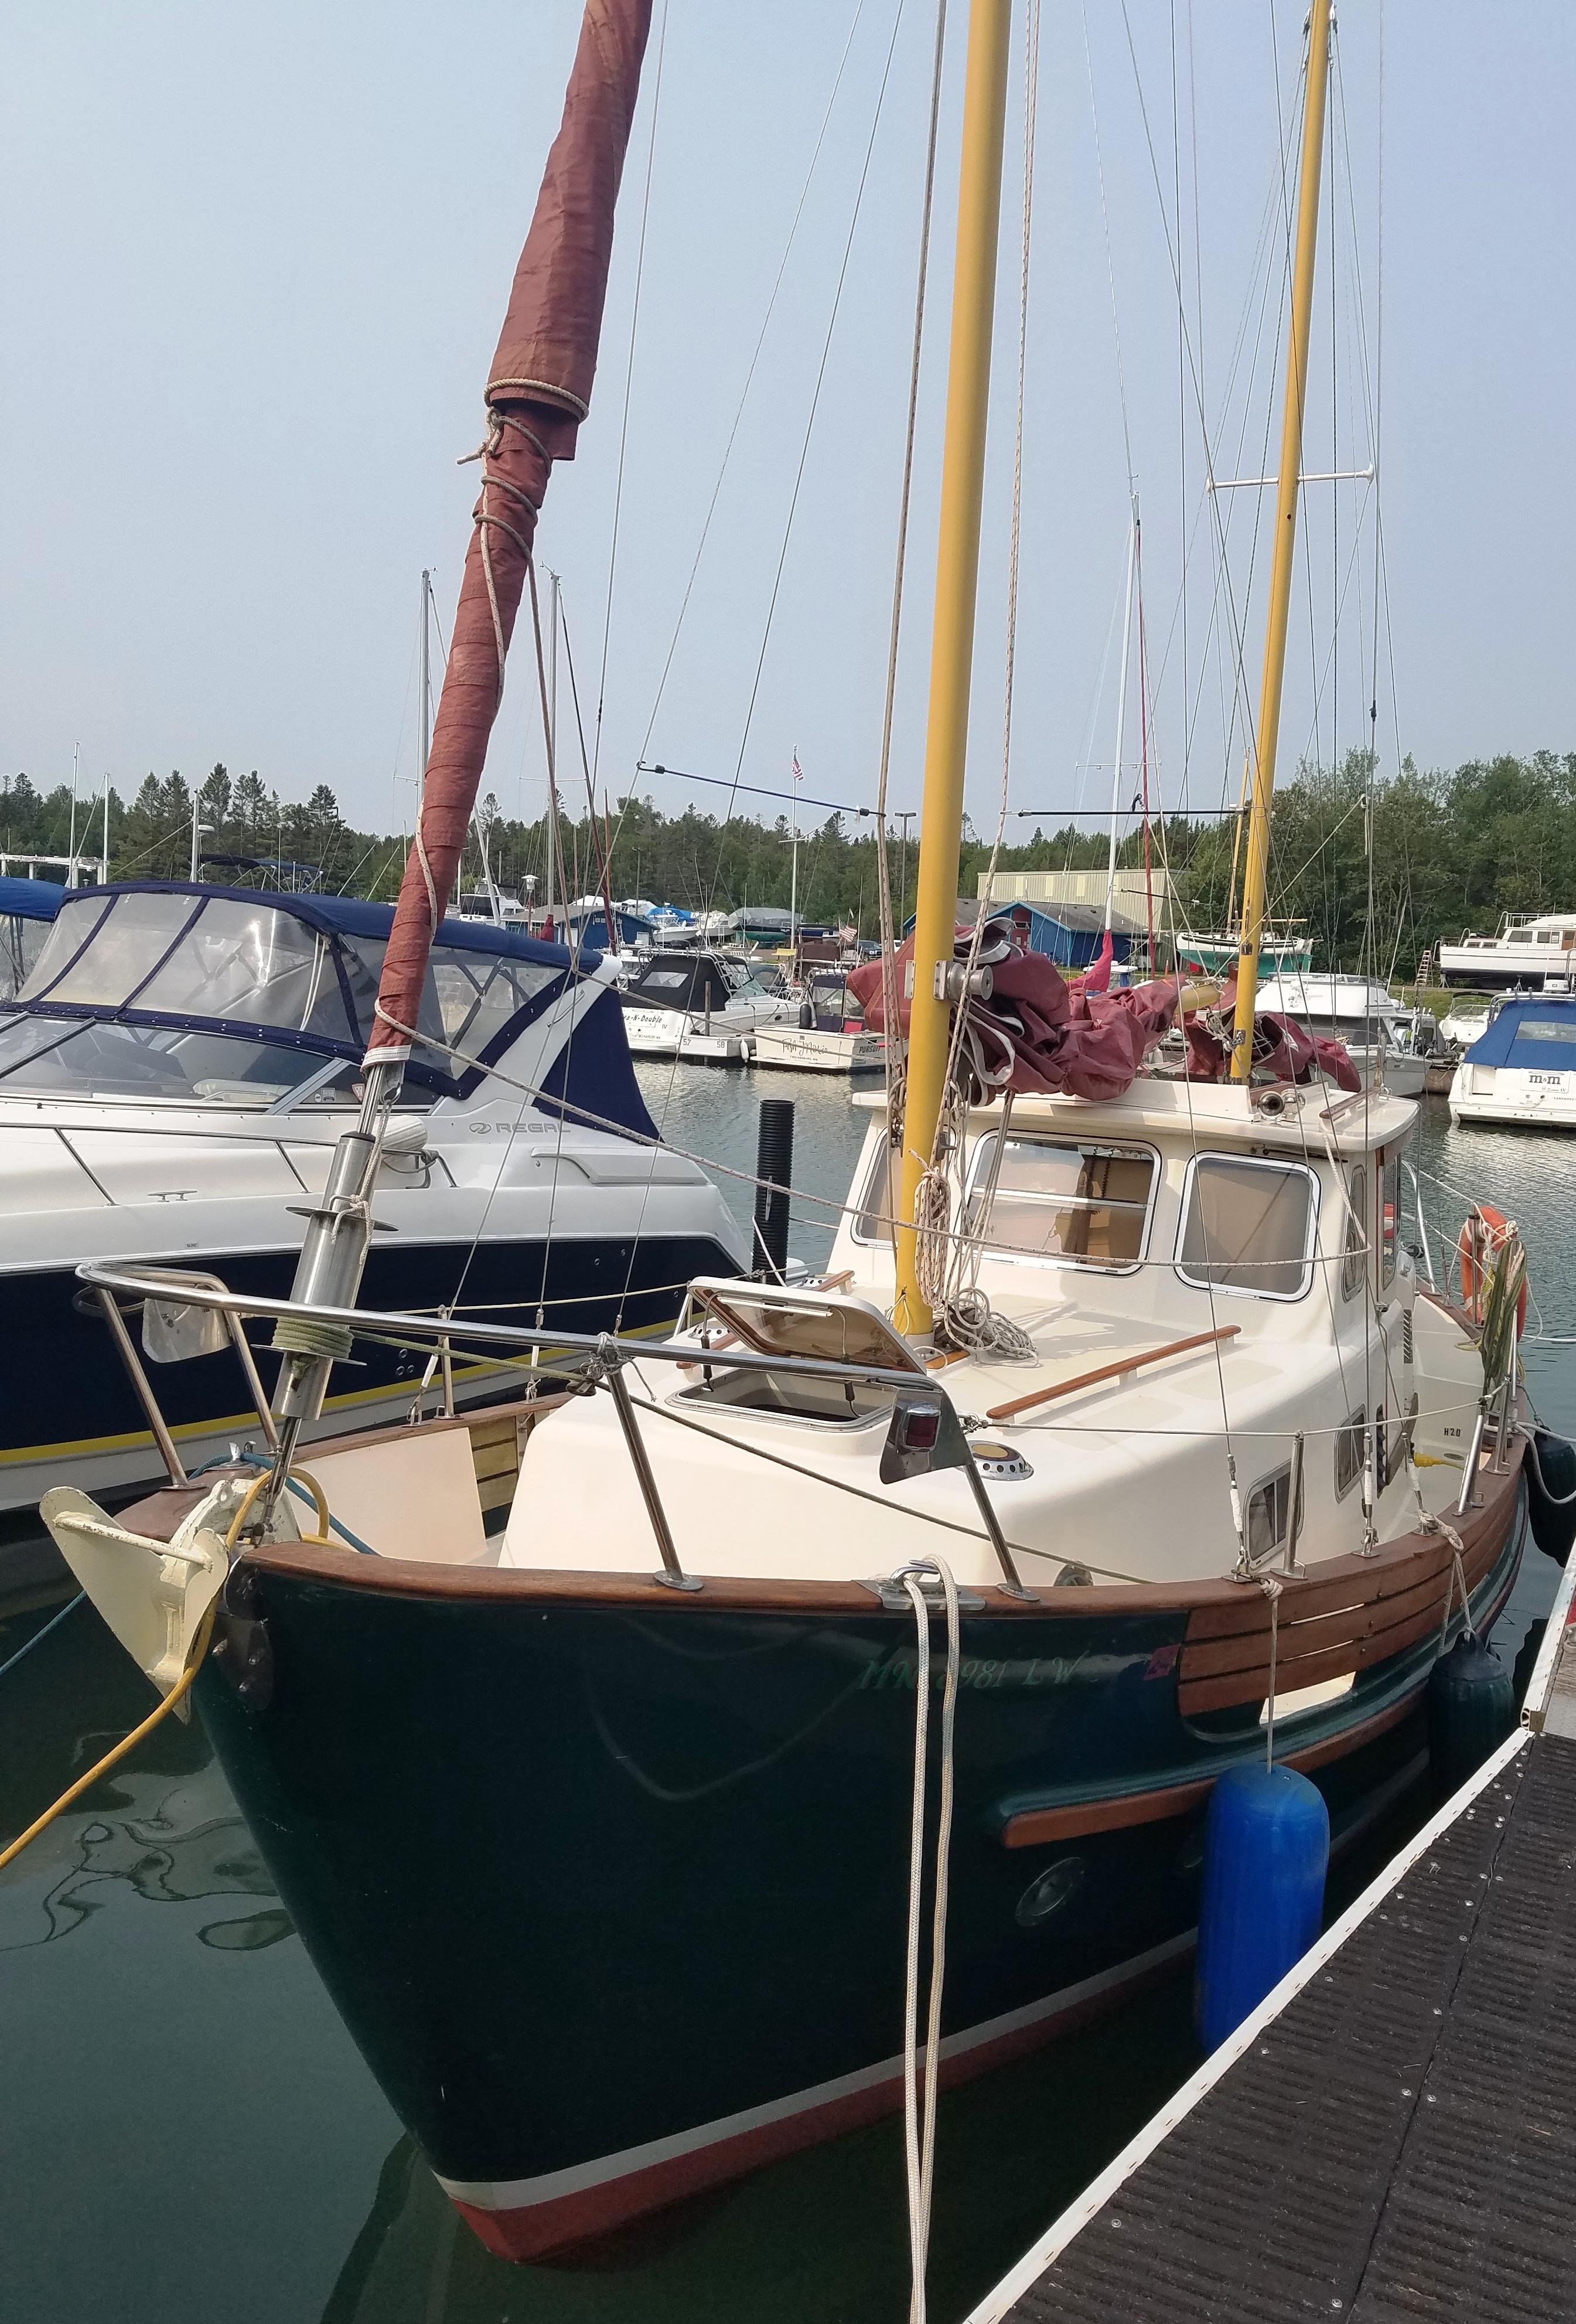 sailboats for sale in duluth mn